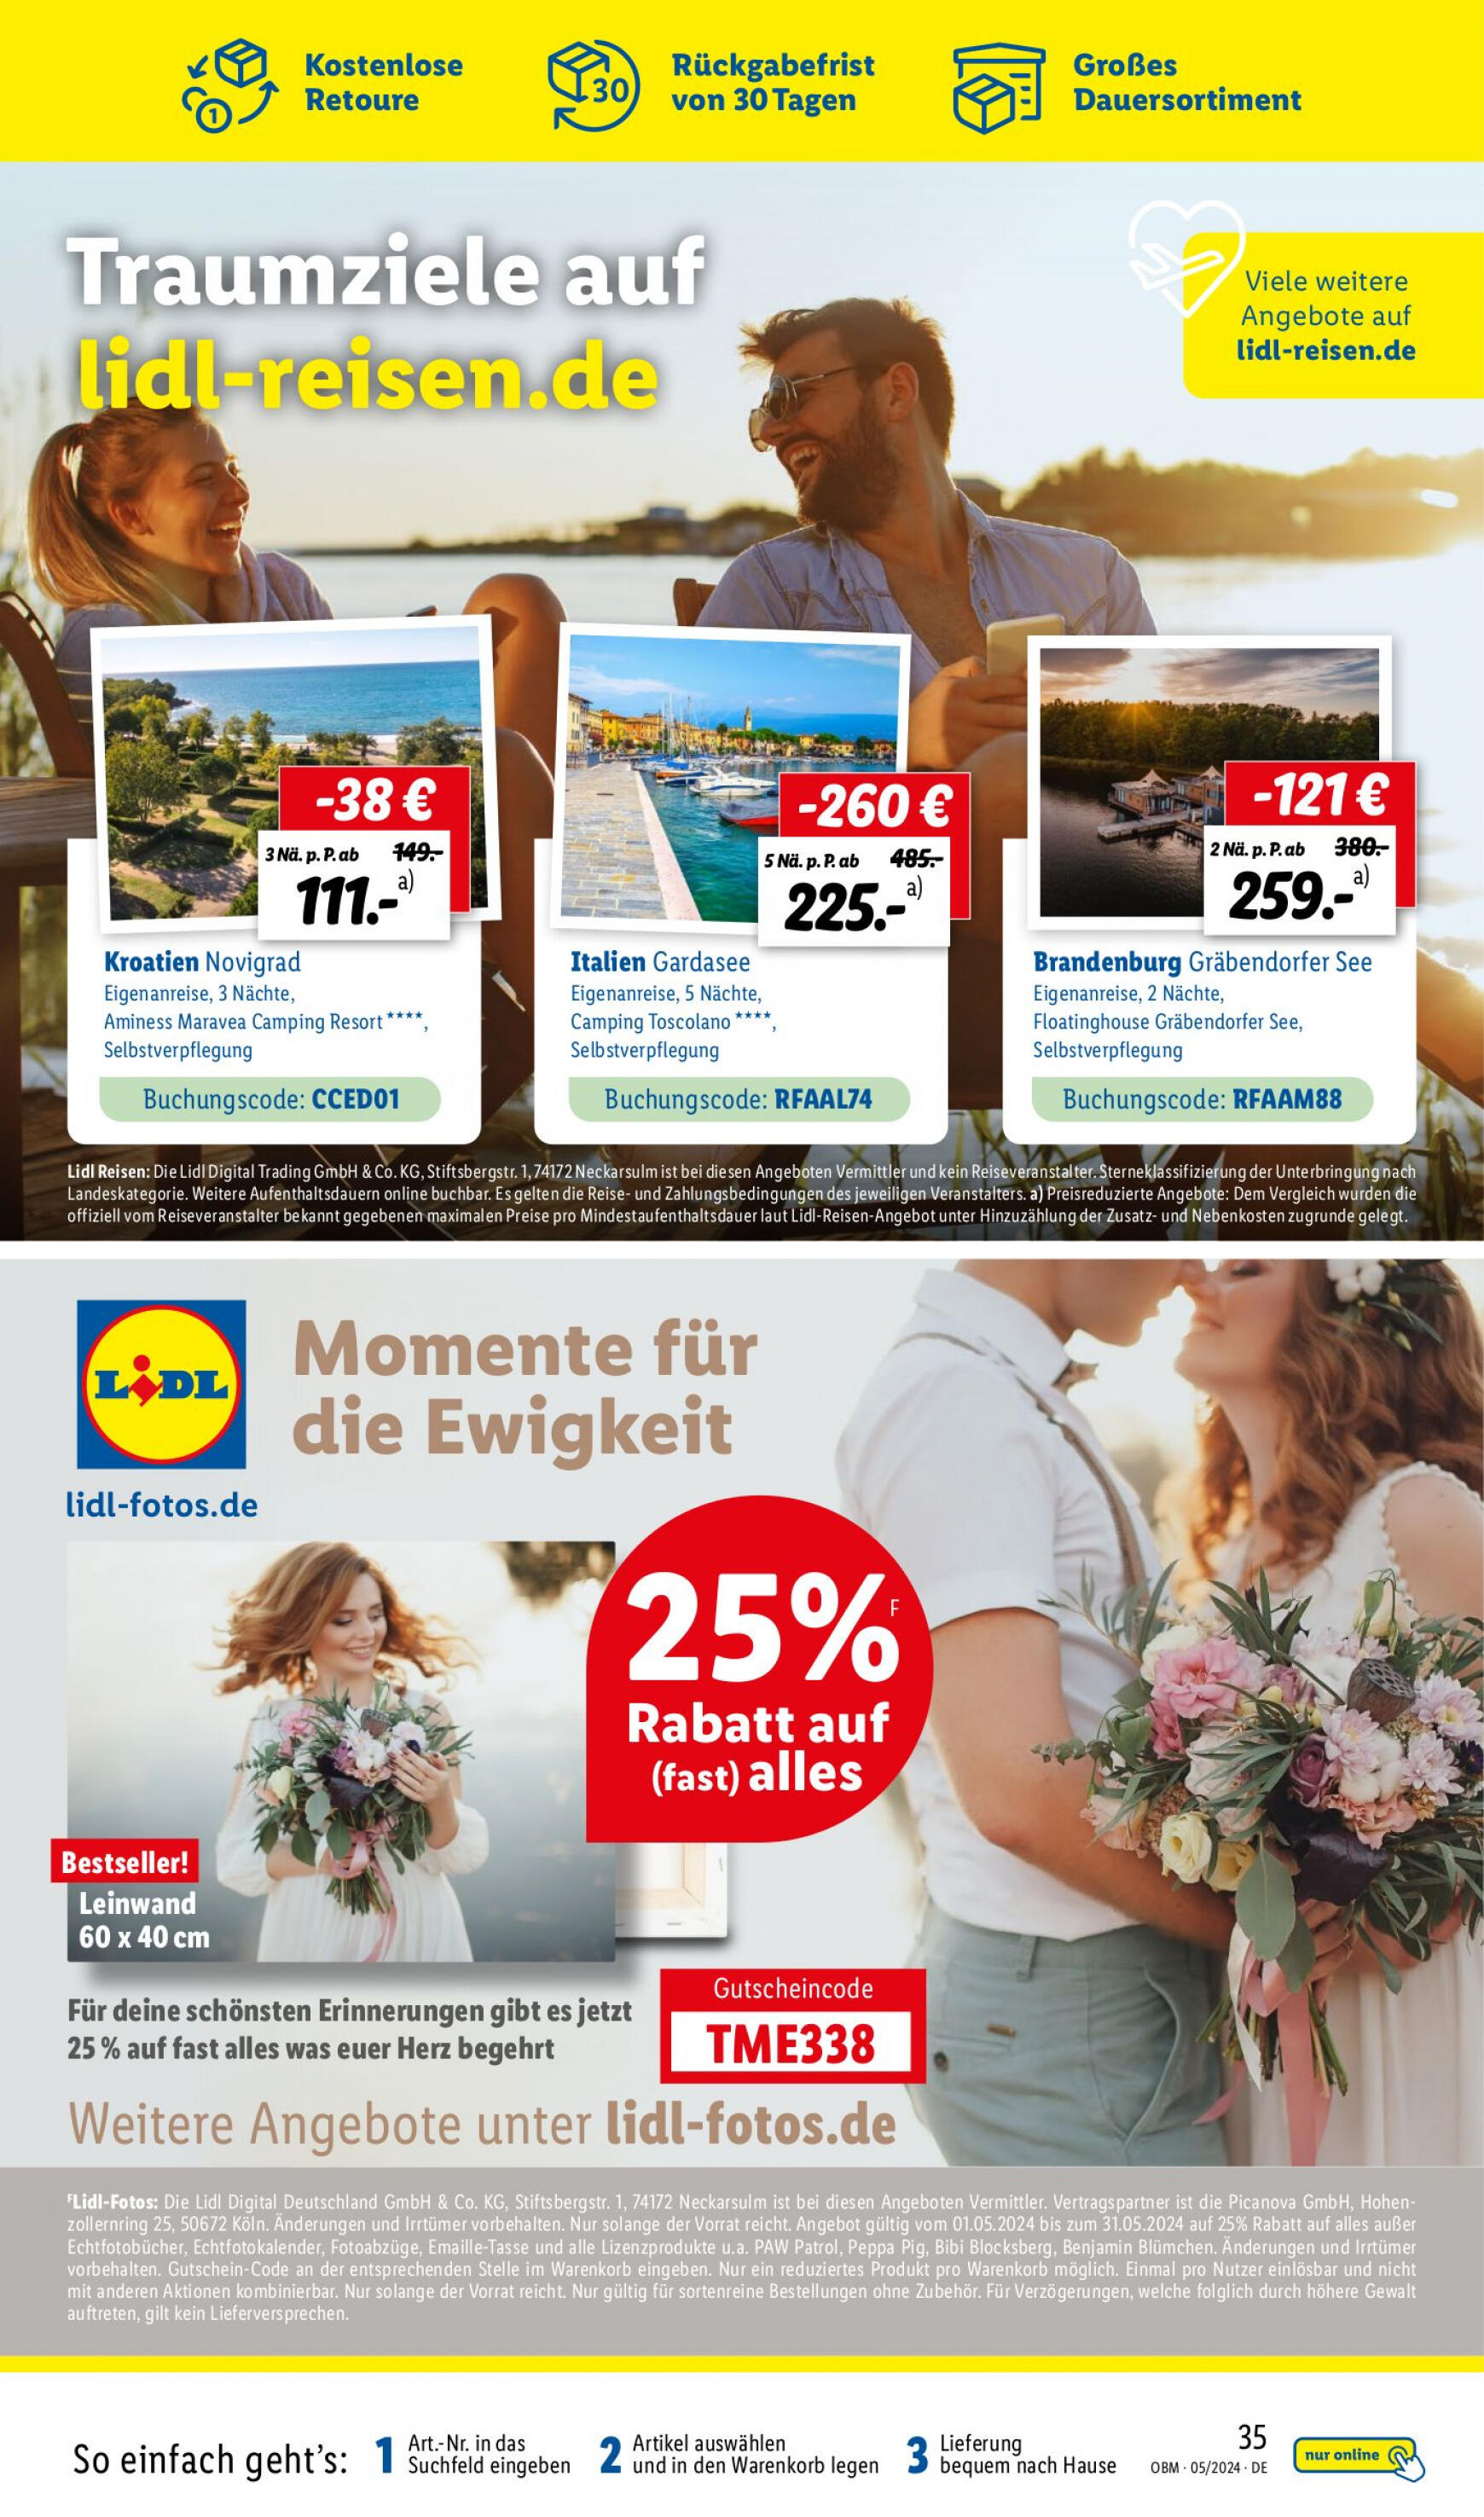 lidl - Flyer Lidl - Aktuelle Onlineshop-Highlights aktuell 01.05. - 31.05. - page: 35